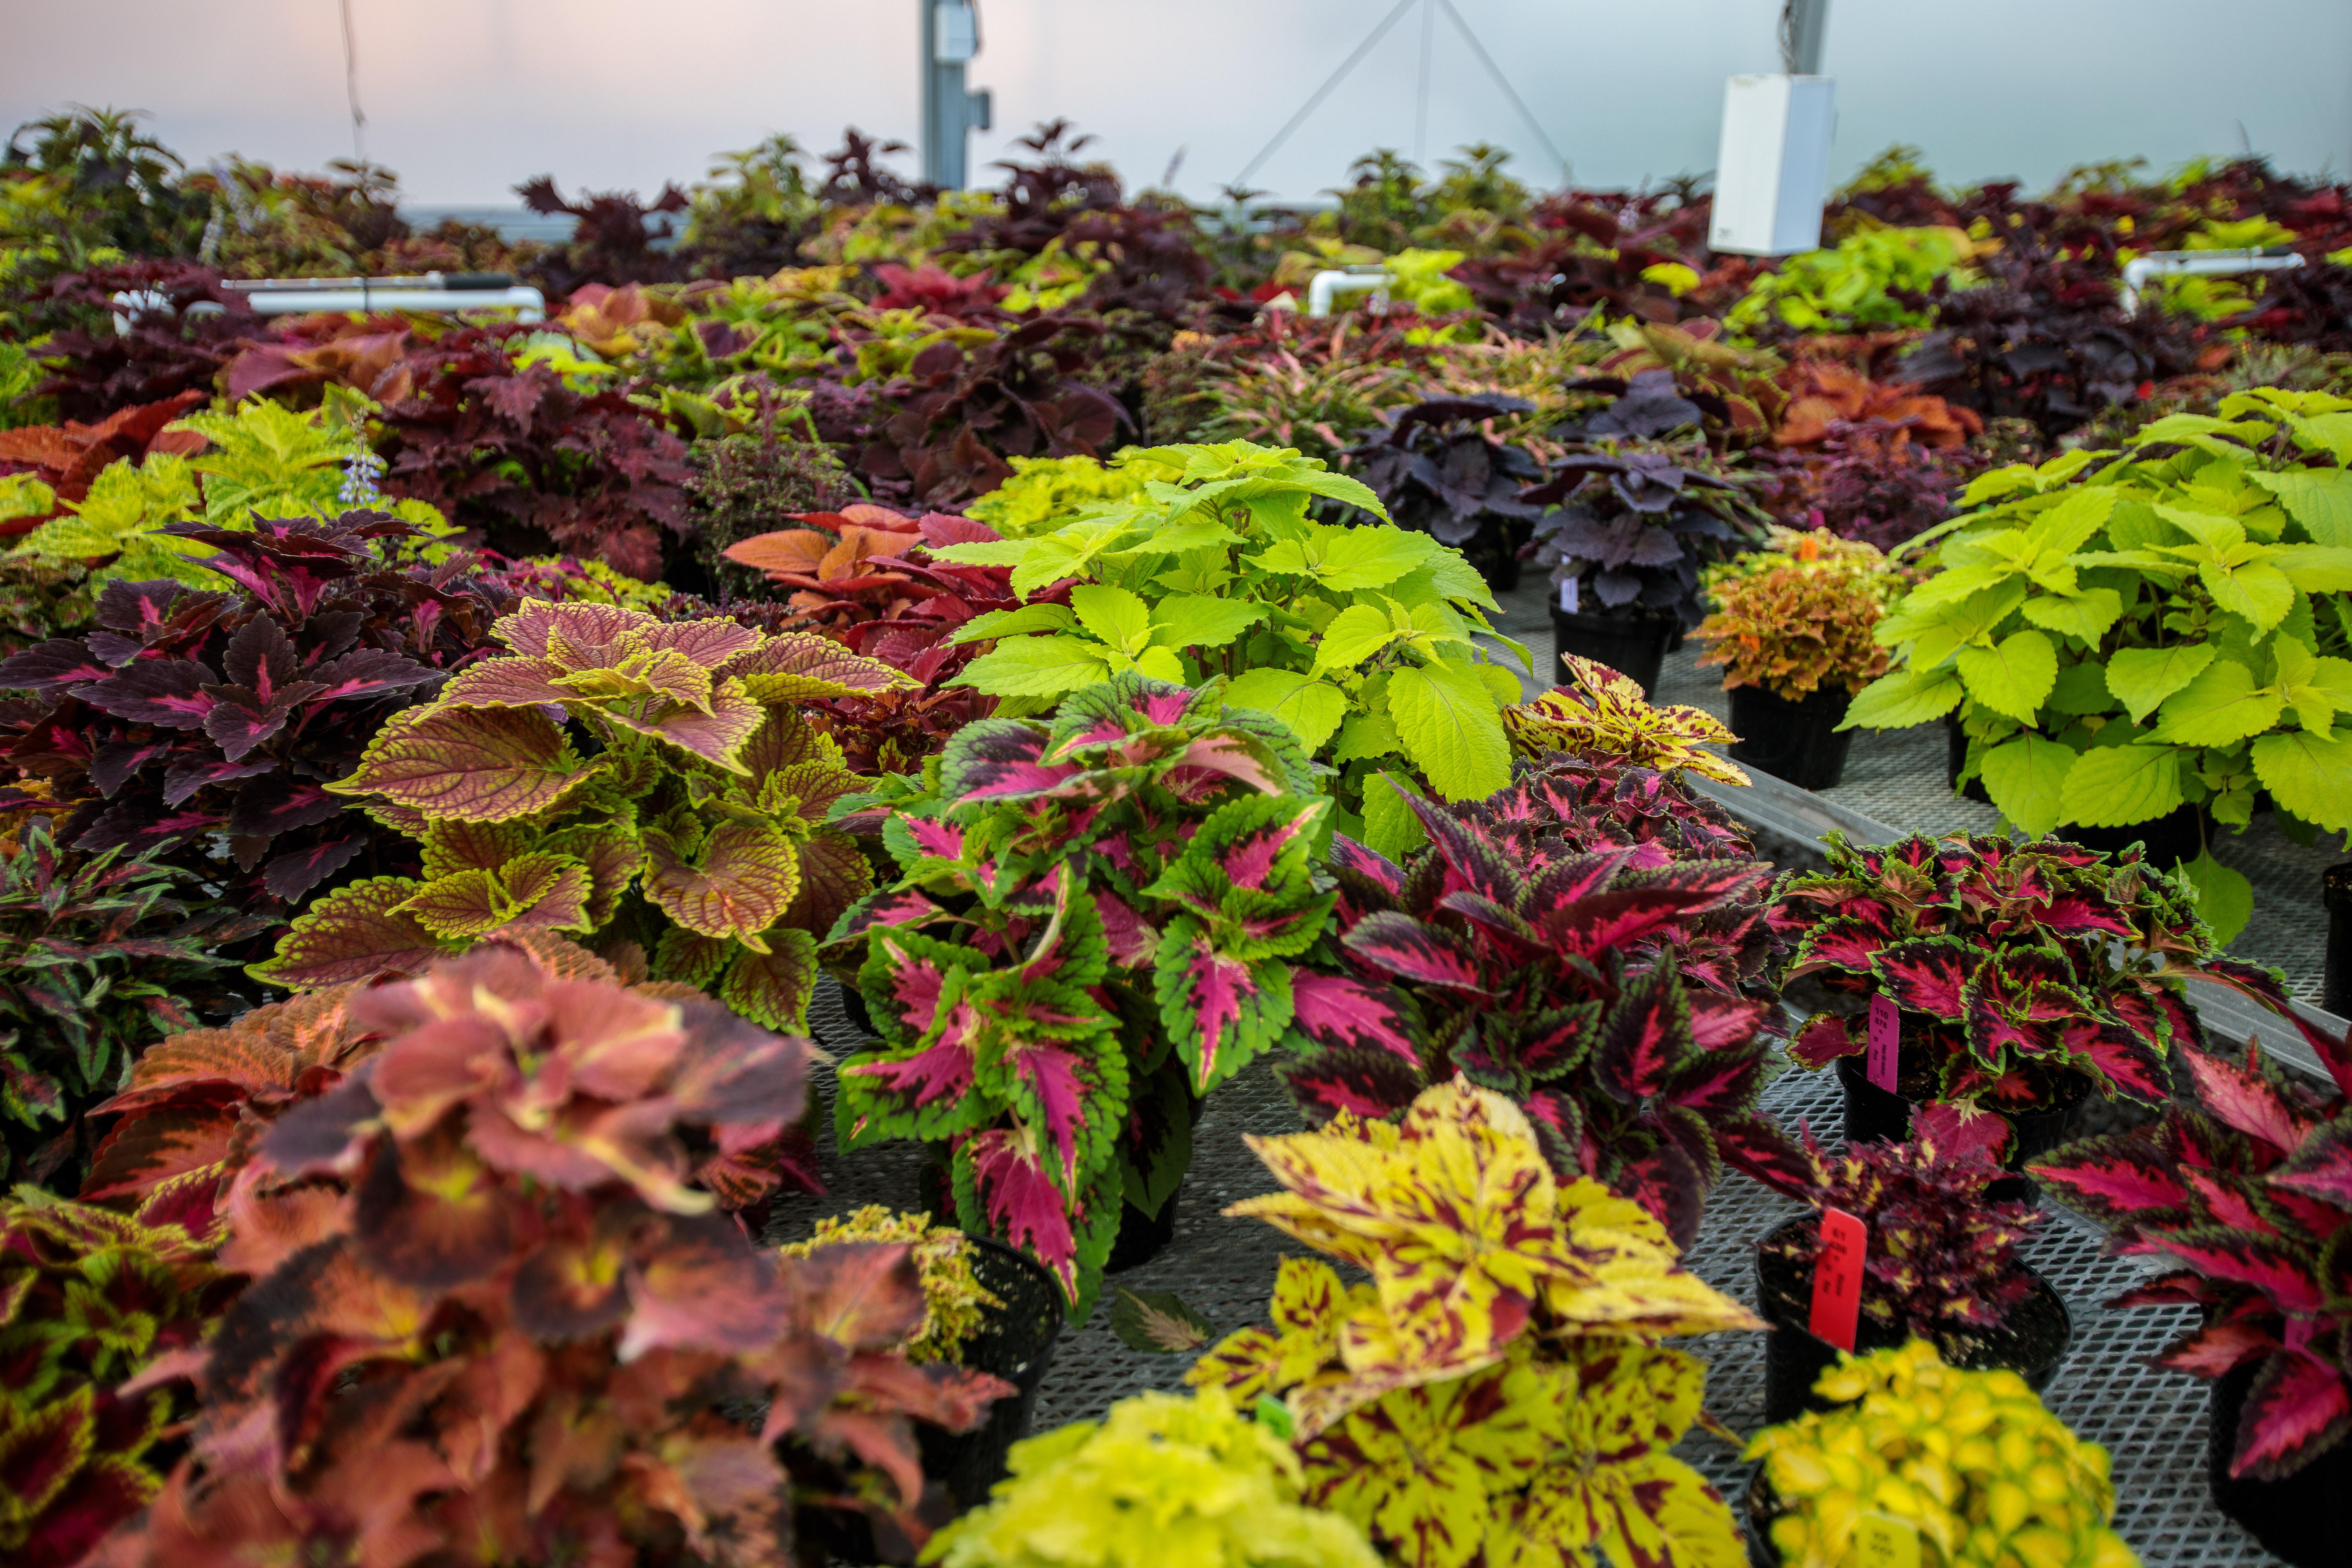 Coleus plants, a common ornamental plant, are lined up in a green house on UK College of Agriculture, Food and Environment South Farm.